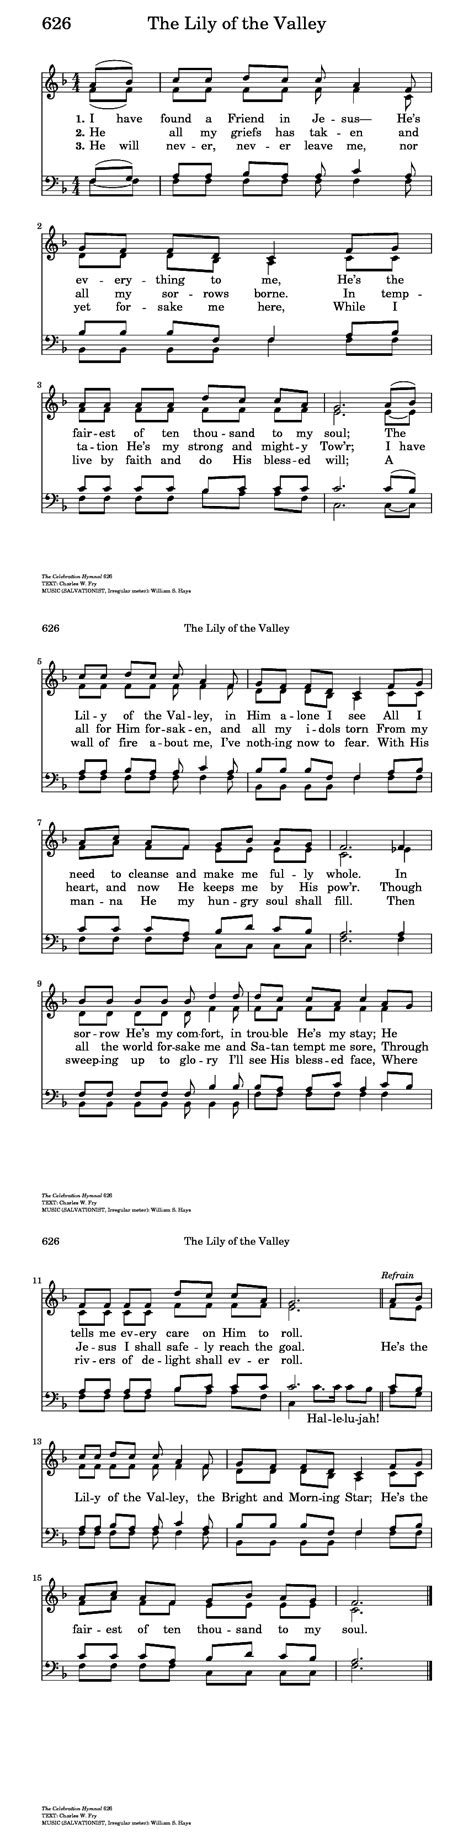 The Lily Of The Valley Christian Song Lyrics Bible Songs Hymn Sheet